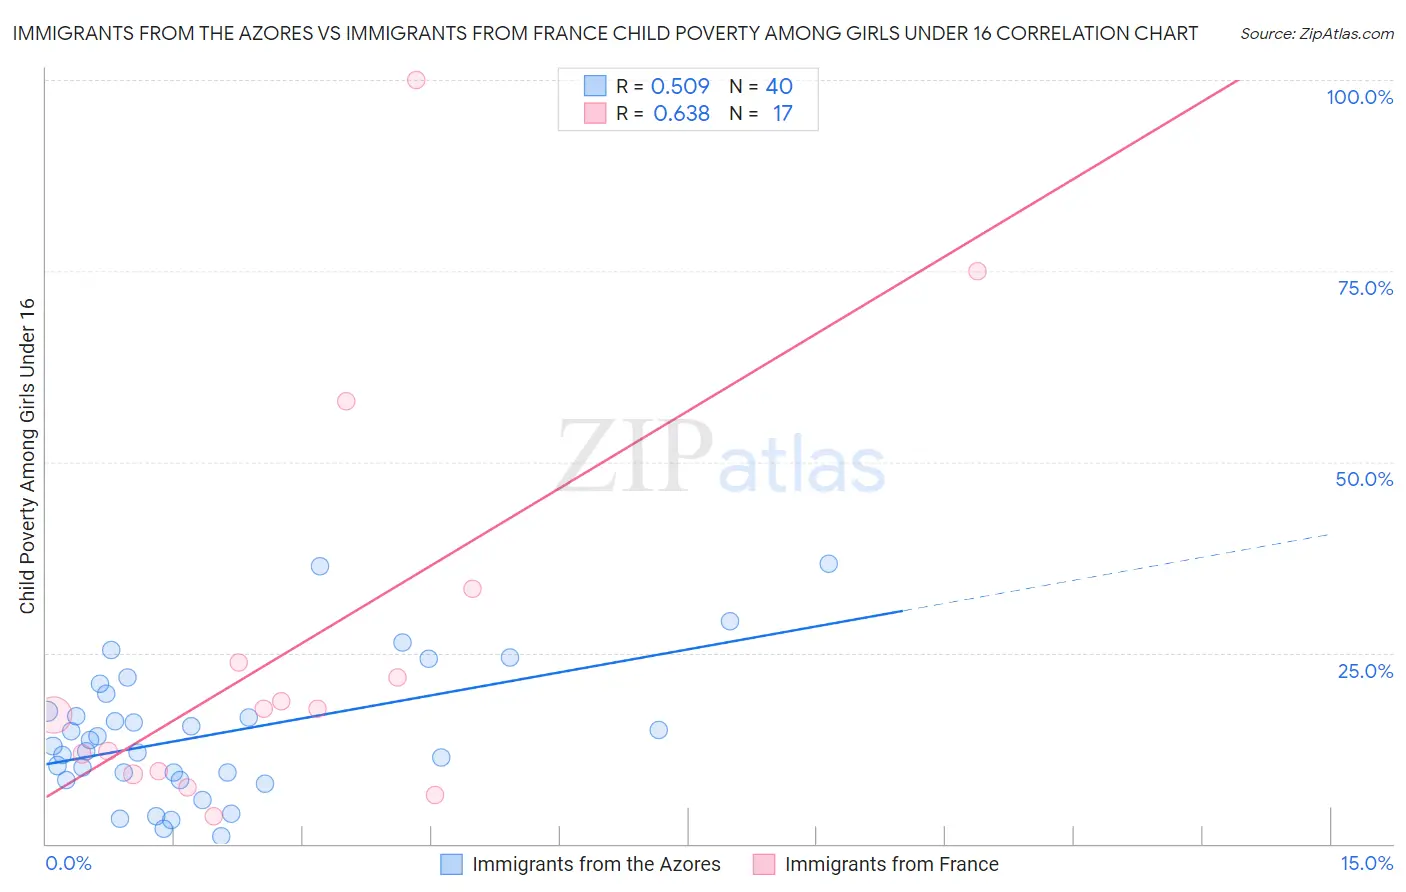 Immigrants from the Azores vs Immigrants from France Child Poverty Among Girls Under 16